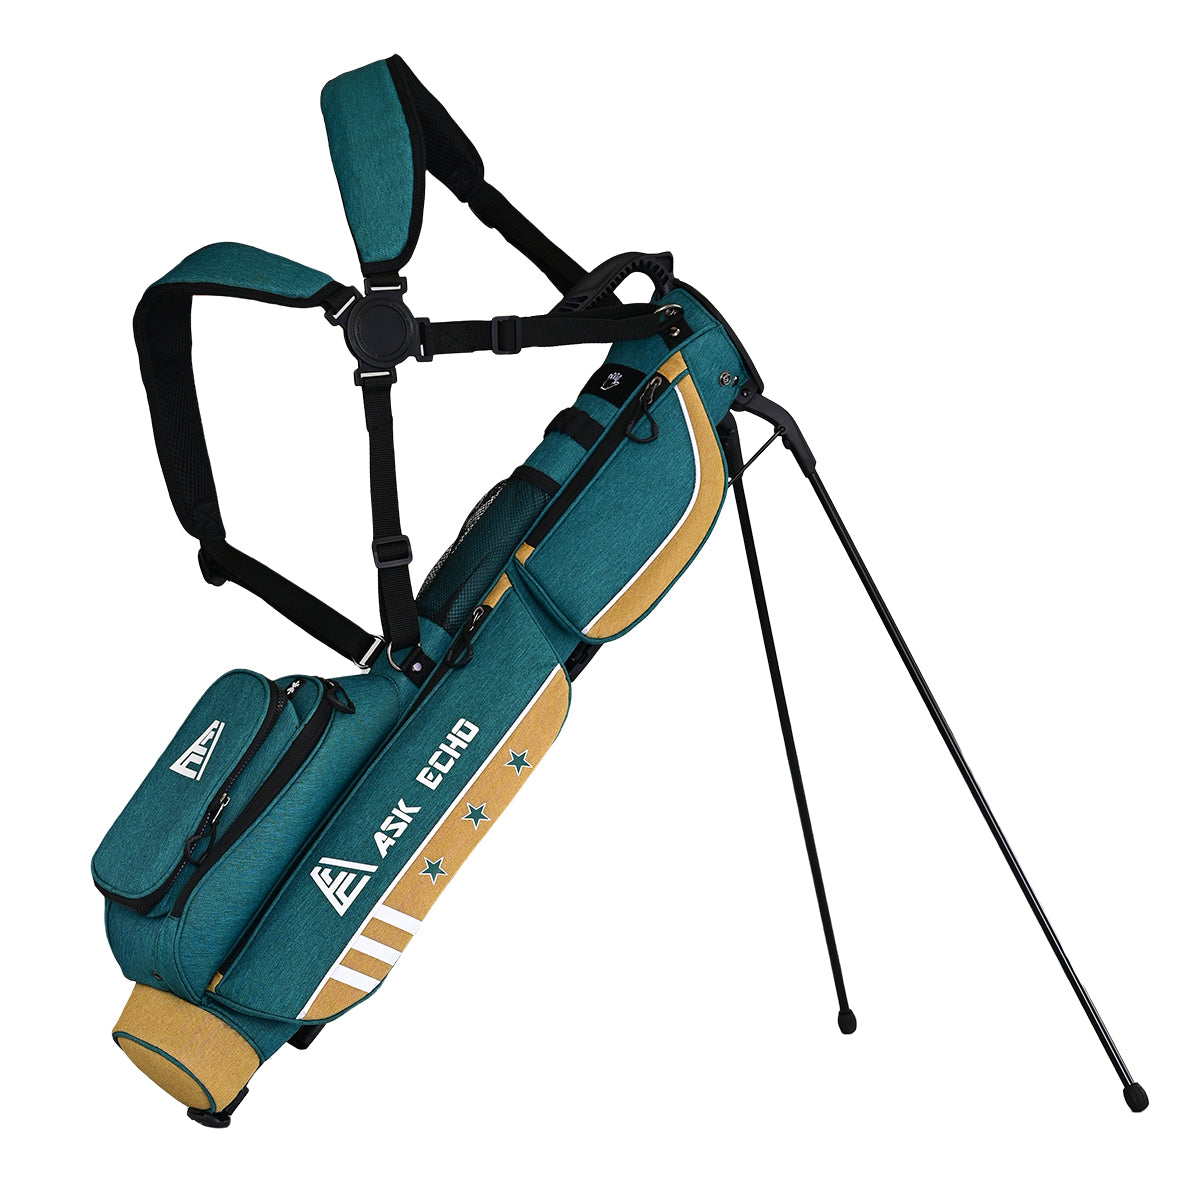 Askecho Golf Sunday Bag Holds Up To 12 Clubs Enjoy Par 3 With Weekend 2.0 / Grey